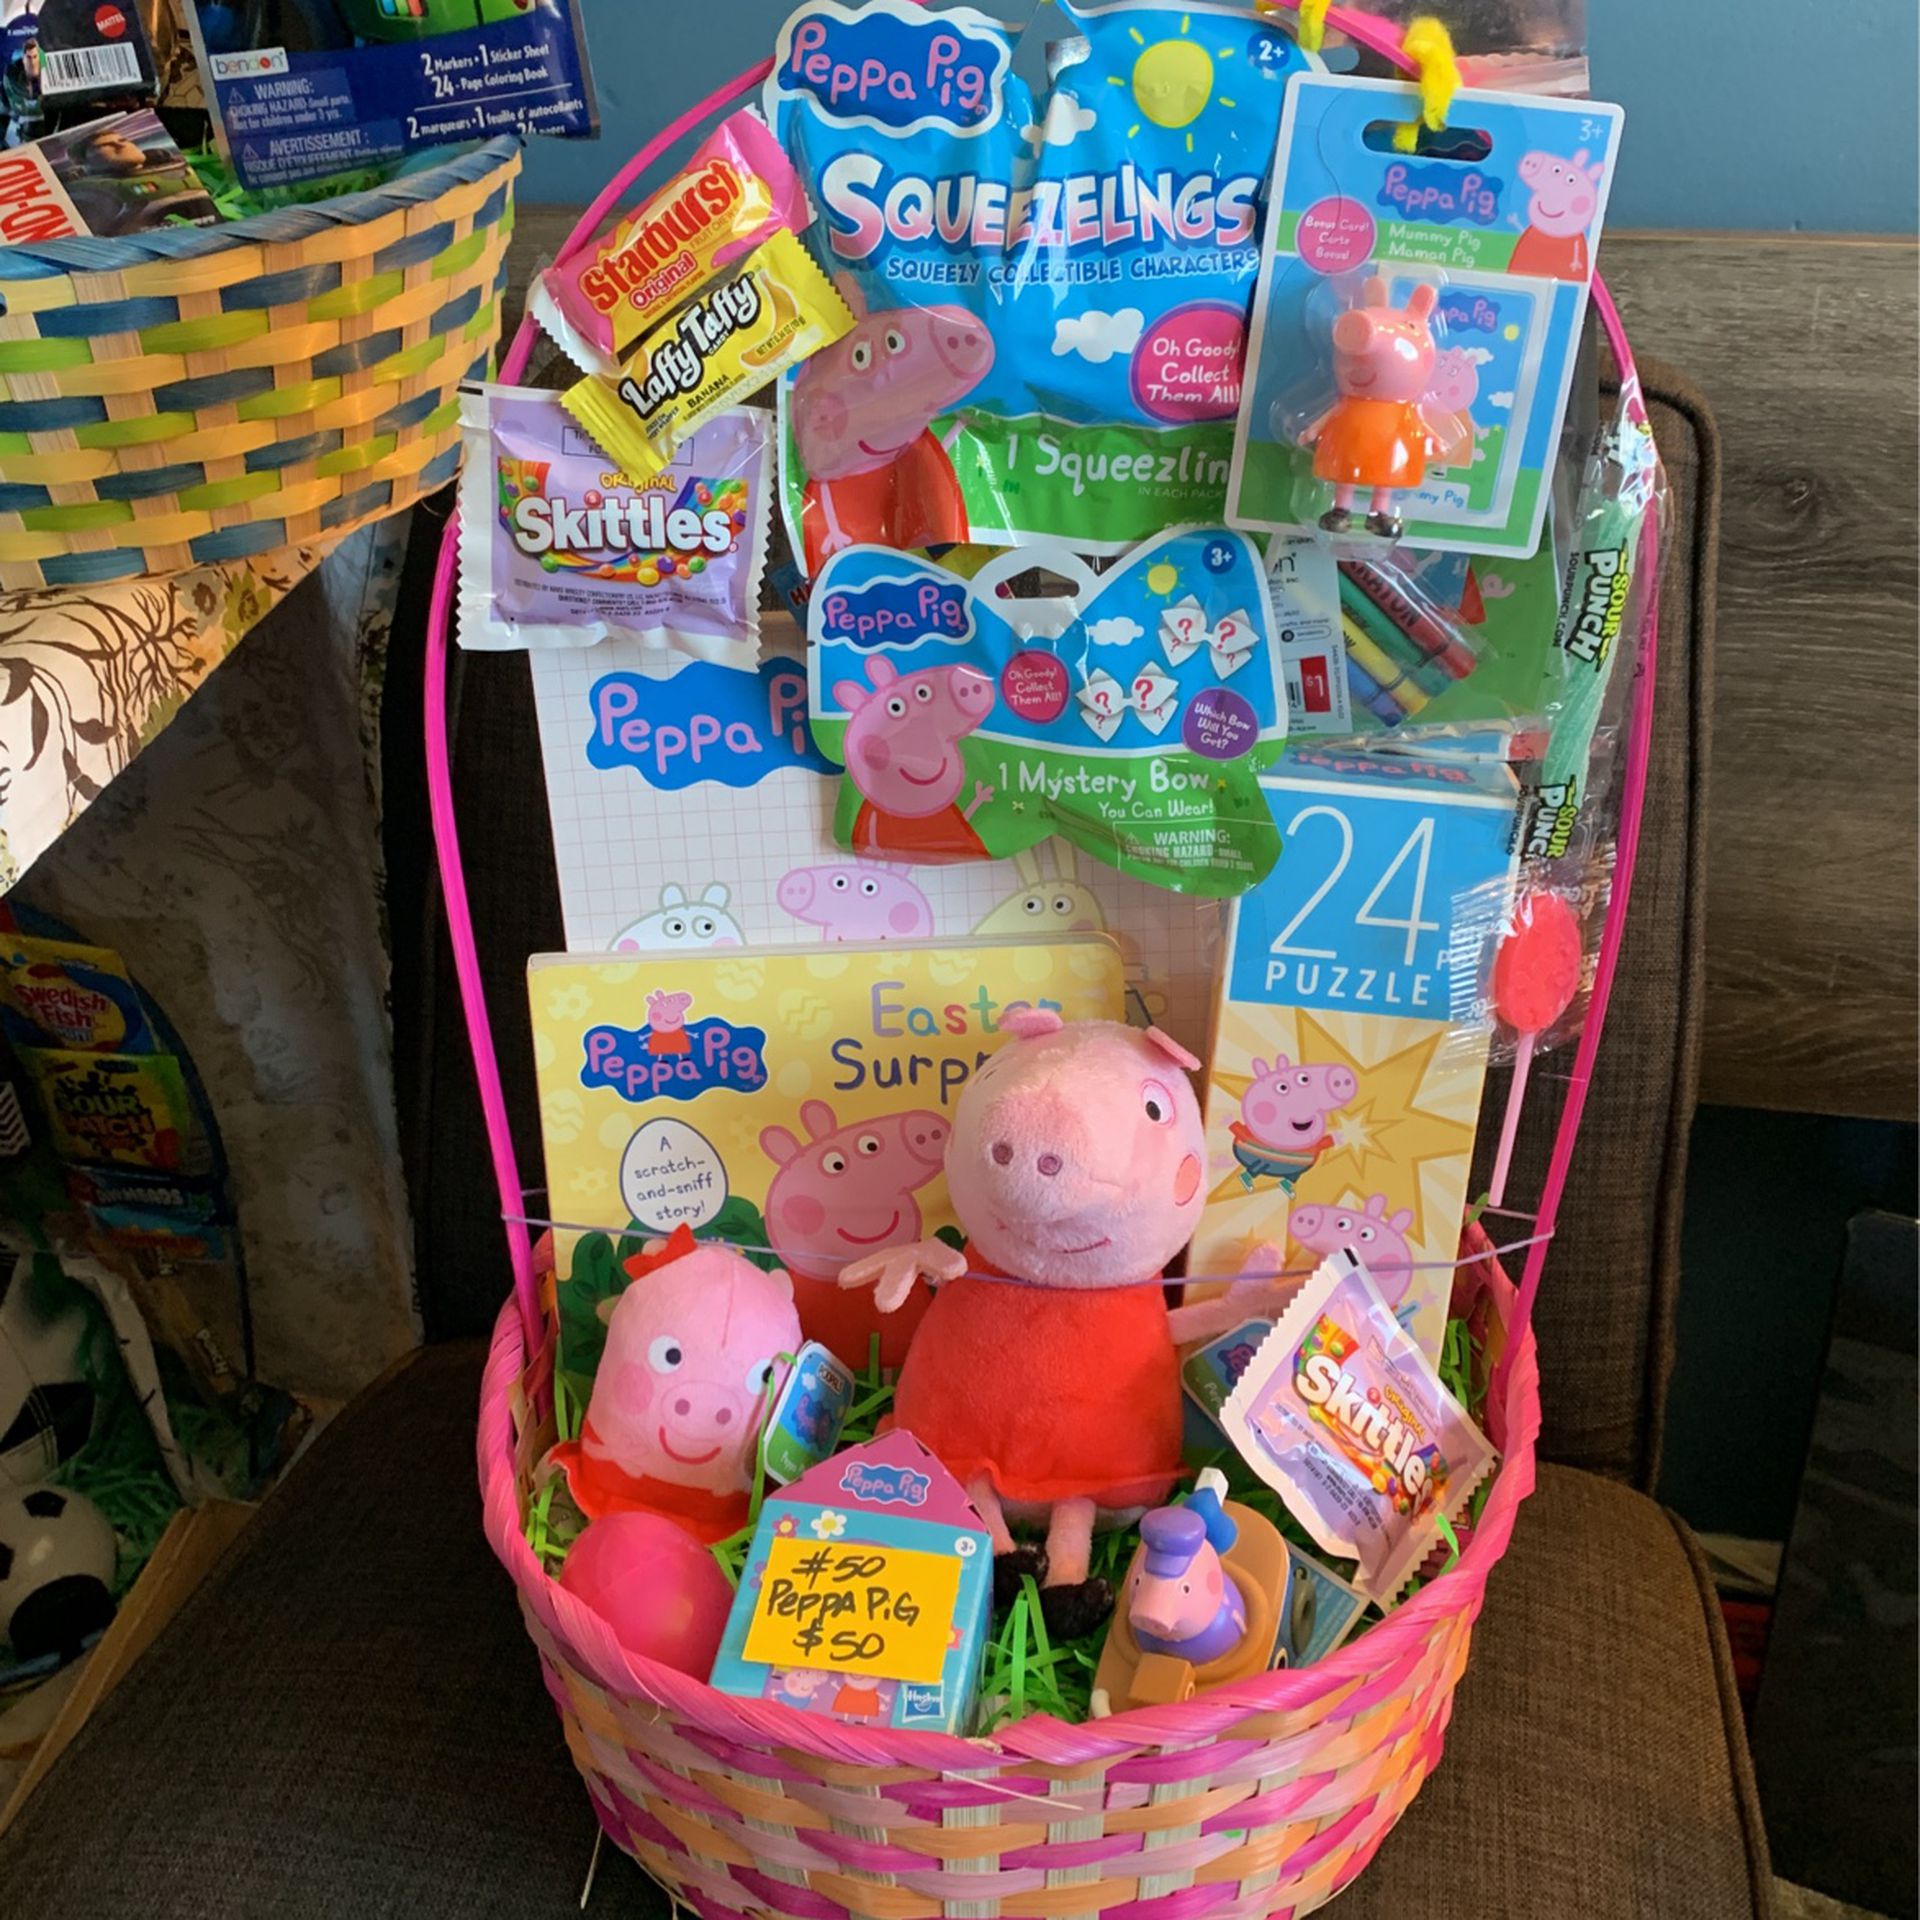 EASTER BASKETS,DIFFERENT CHARACTERS STICH,CAPTAIN AMERICA,THOMAS THE TRAIN,PEPPA PIG AND MORE